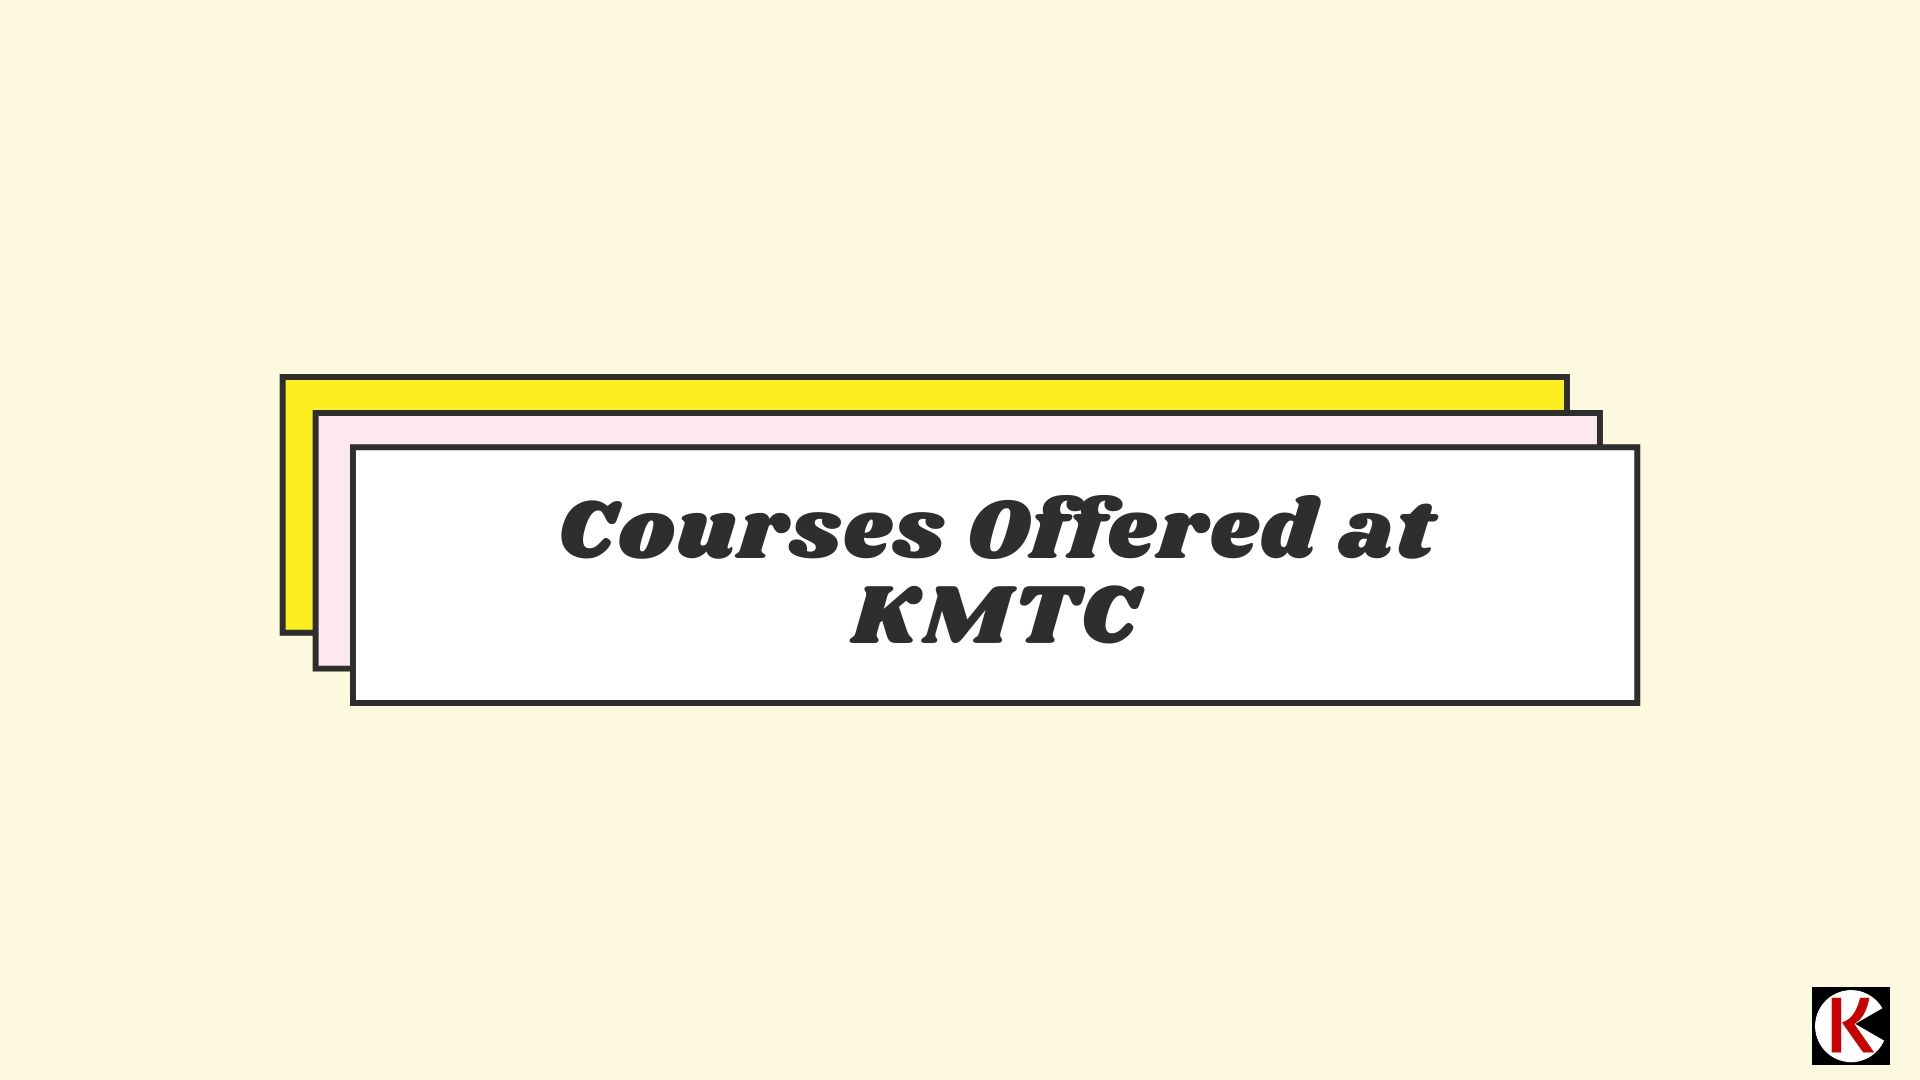 Courses offered at Kenya Medical Training College